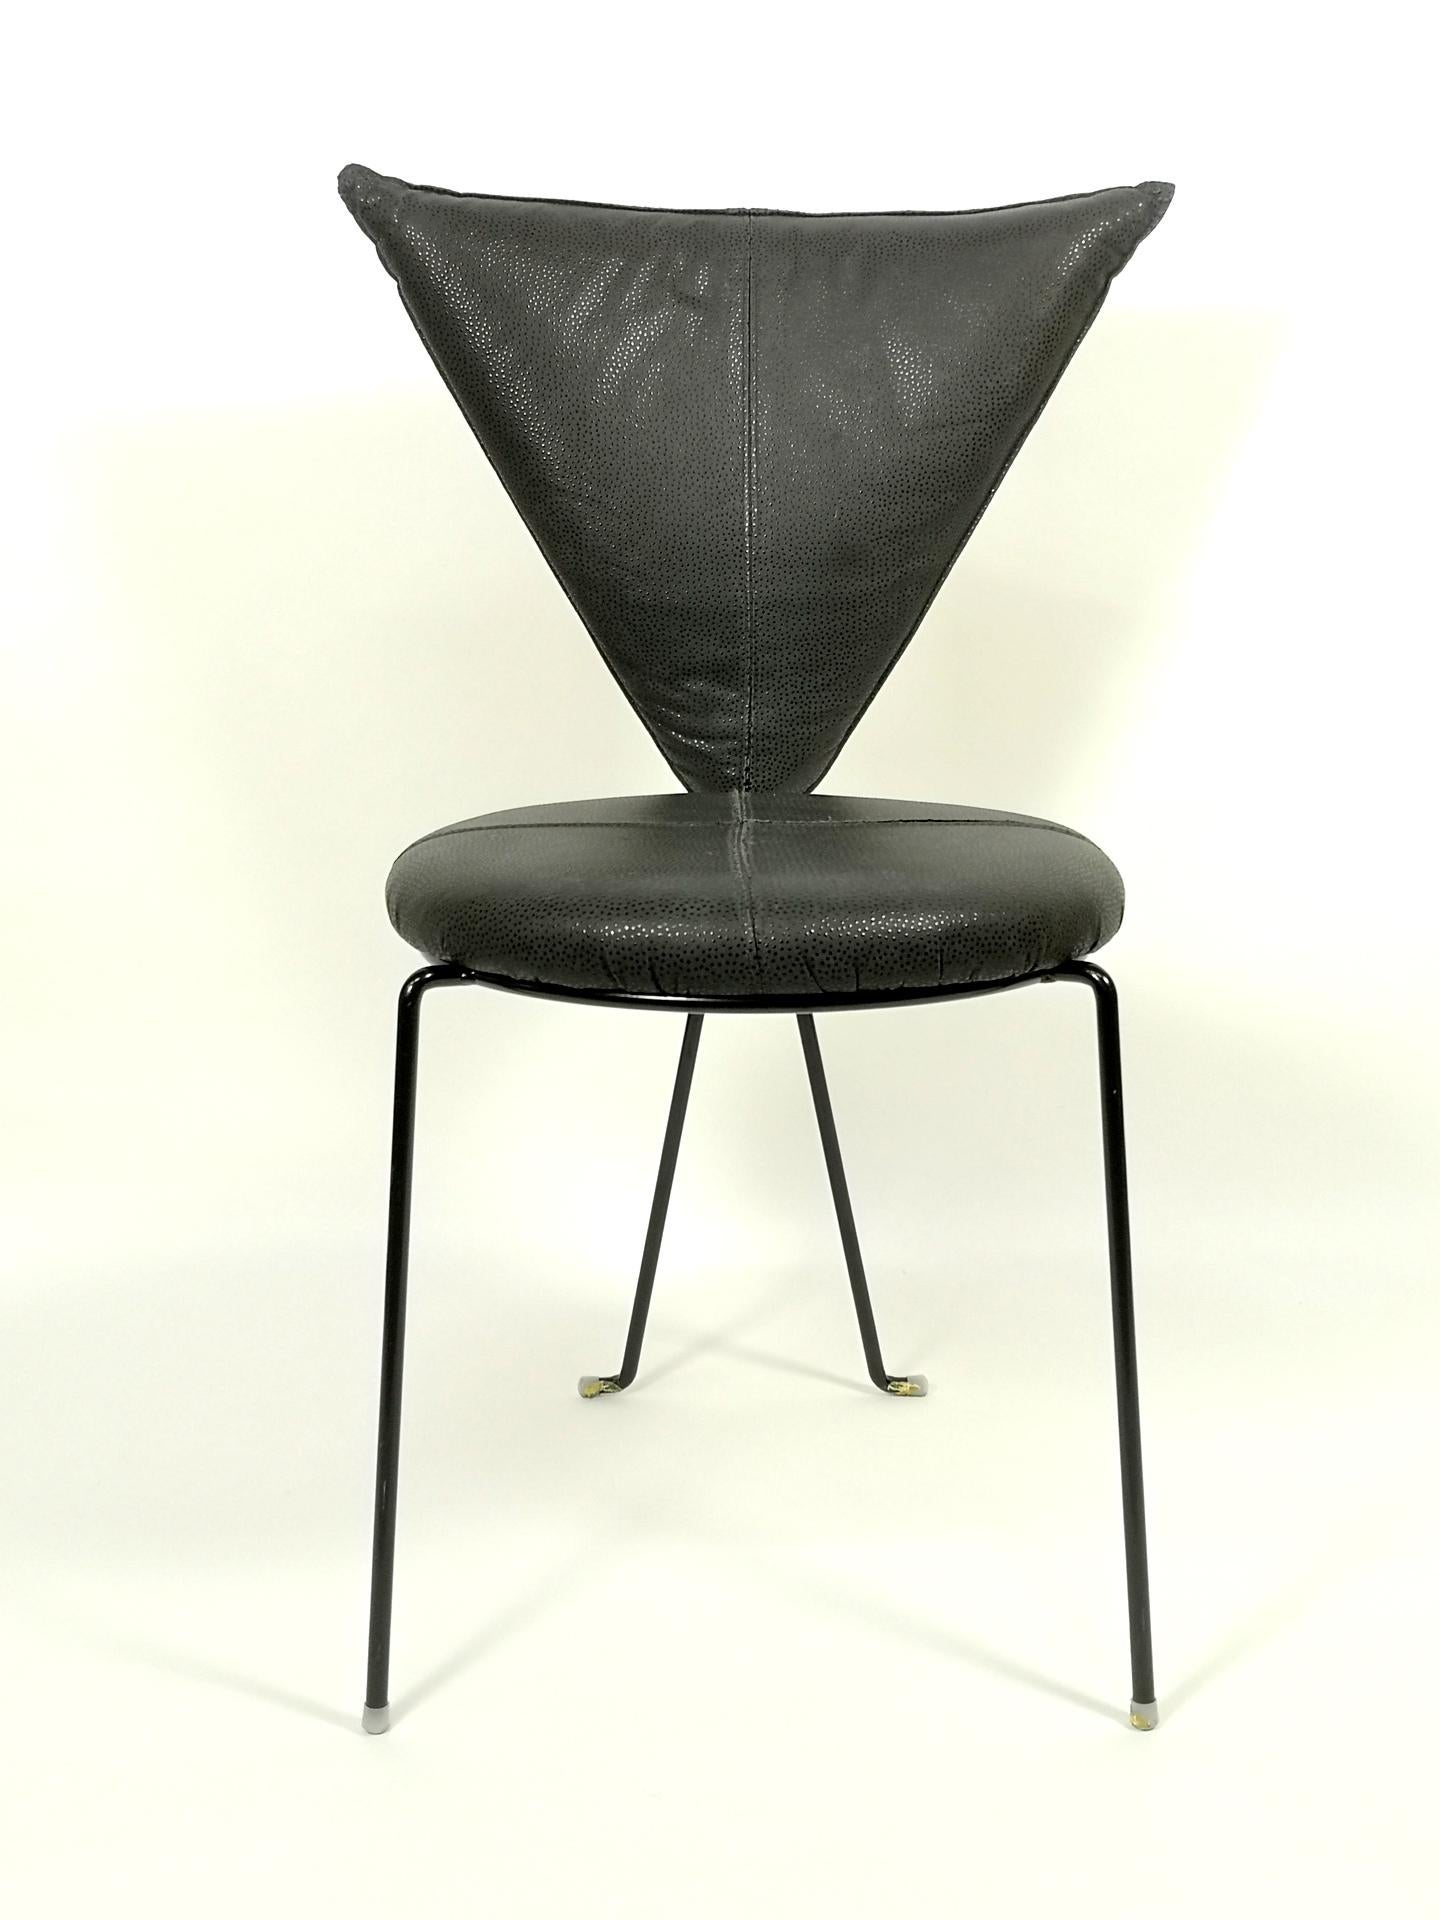 Post-Modern Rare Set of Four Black Leather and Painted Steel Chairs by Helmut Lubke & Co